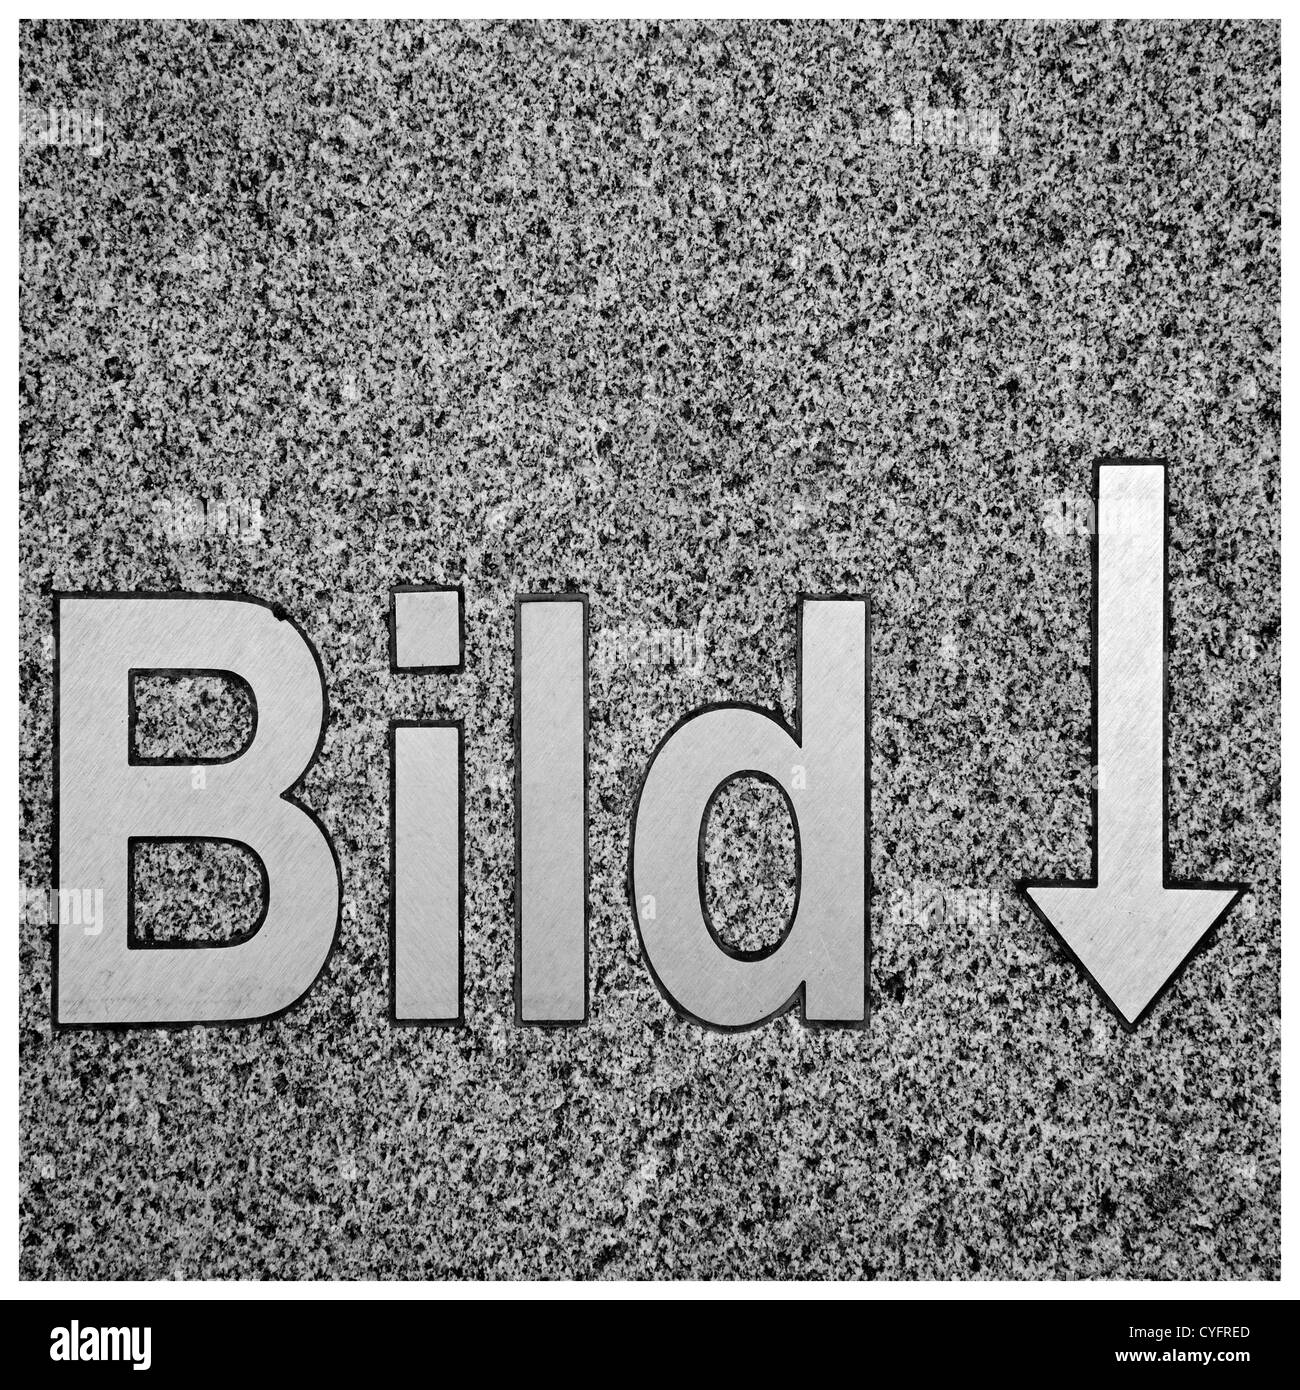 keyboard symbols on the pavement in front of the uinversity library Berlin: Bild, picture arrow down Stock Photo